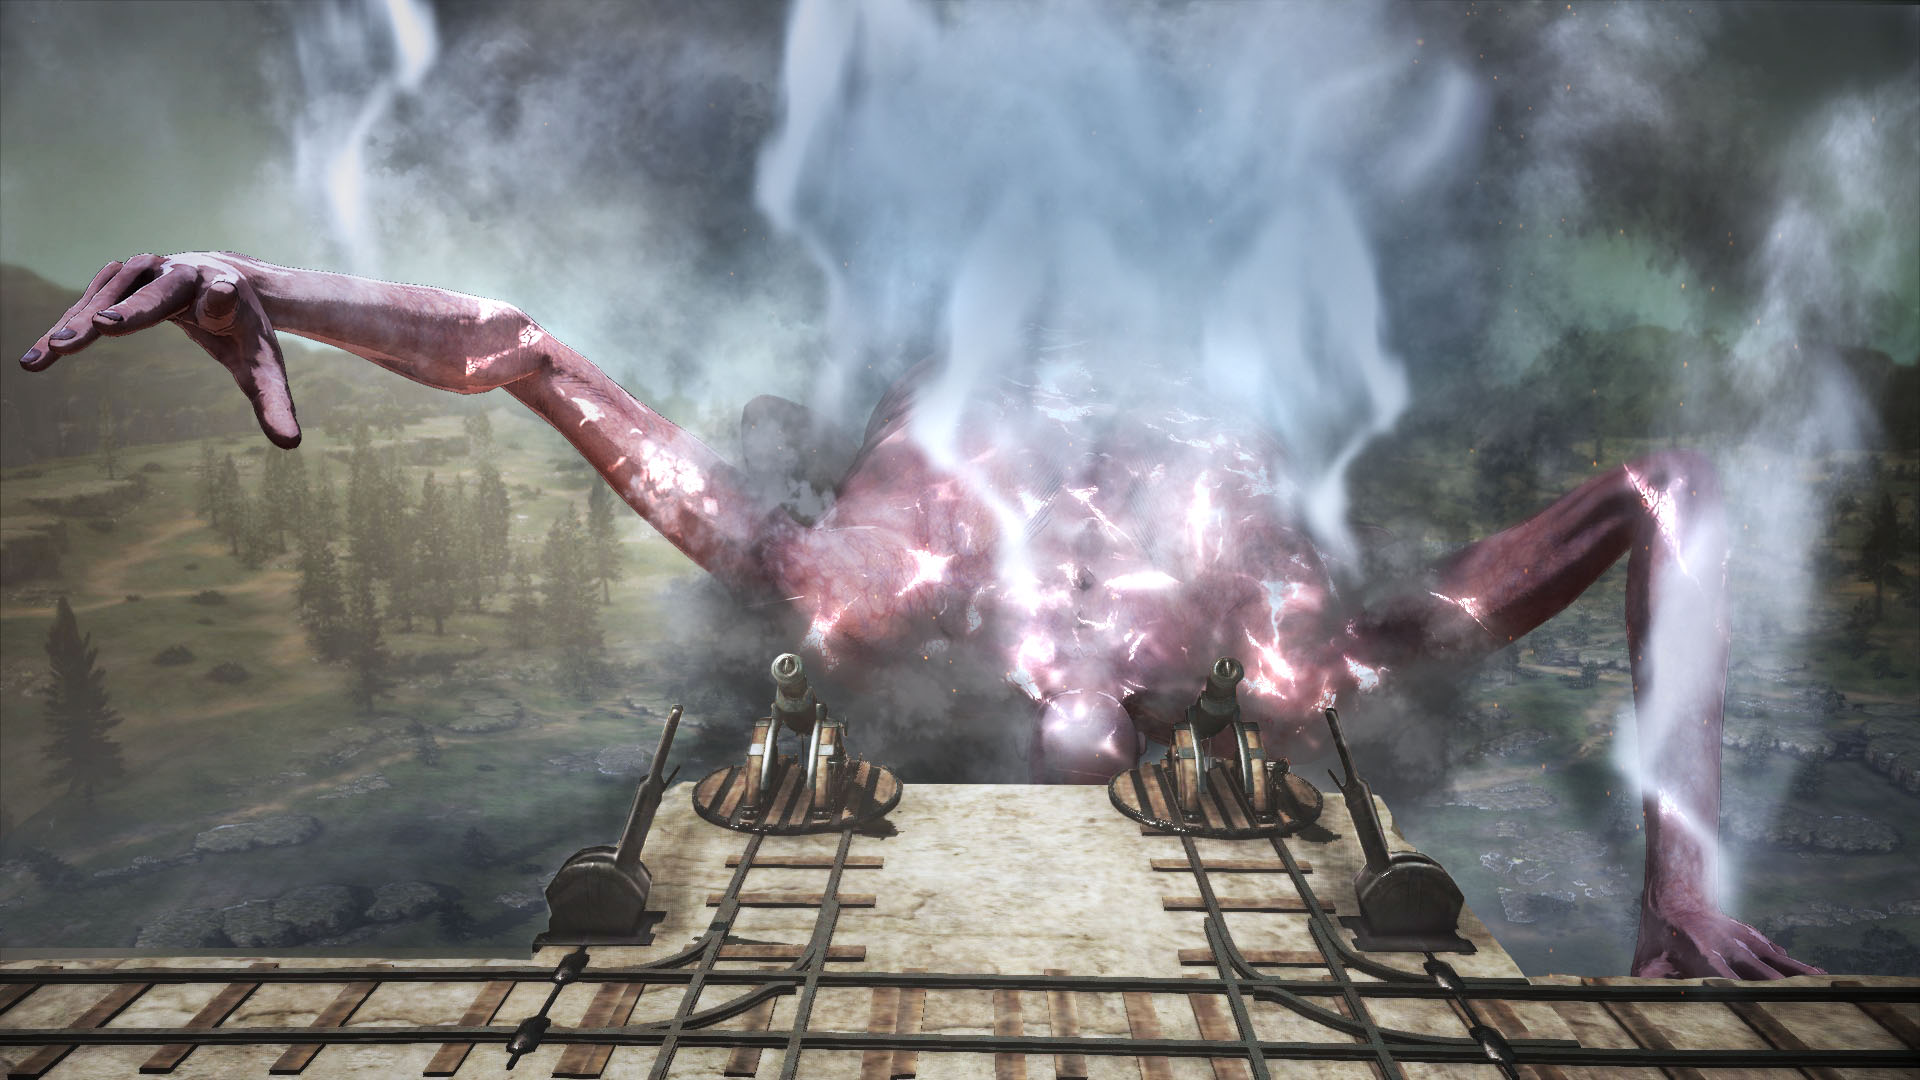 Attack On Titan 2: Final Battle enlarges your giant slaying